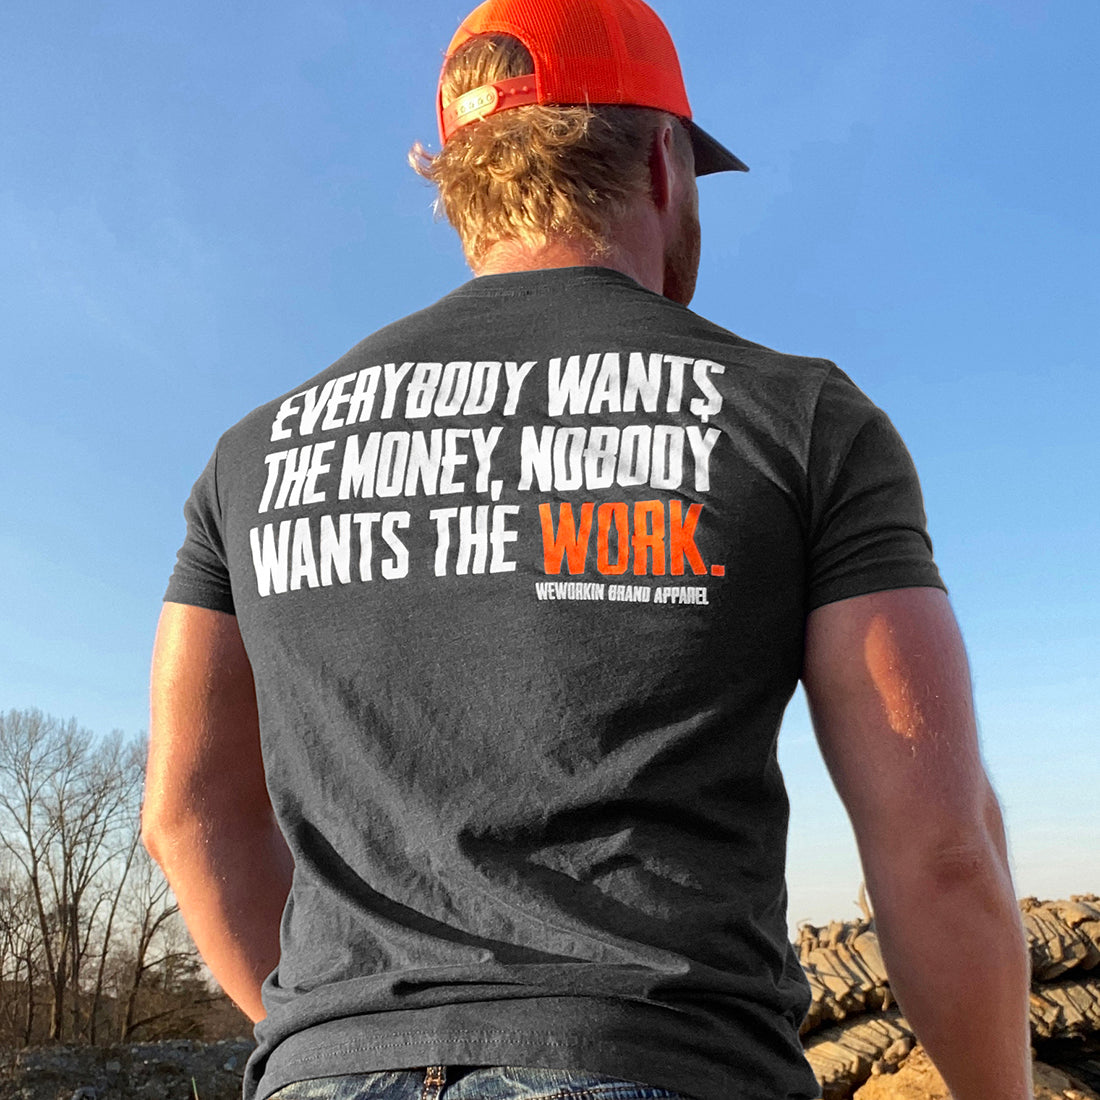 Man pictured from back wearing a WW Charcoal Heather Grey Graphic Tee. "EVERYBODY WANT$ THE MONEY, NOBODY WANTS THE WORK" printed in bold on full back width in white ink, except the word WORK is printed in Neon Orange for emphasis. (WEWORKIN BRAND APPAREL printed small and lower right just below the full back imprint.) Also wearing a WW HARD Blaze Orange/Grey Retro Trucker Hat.